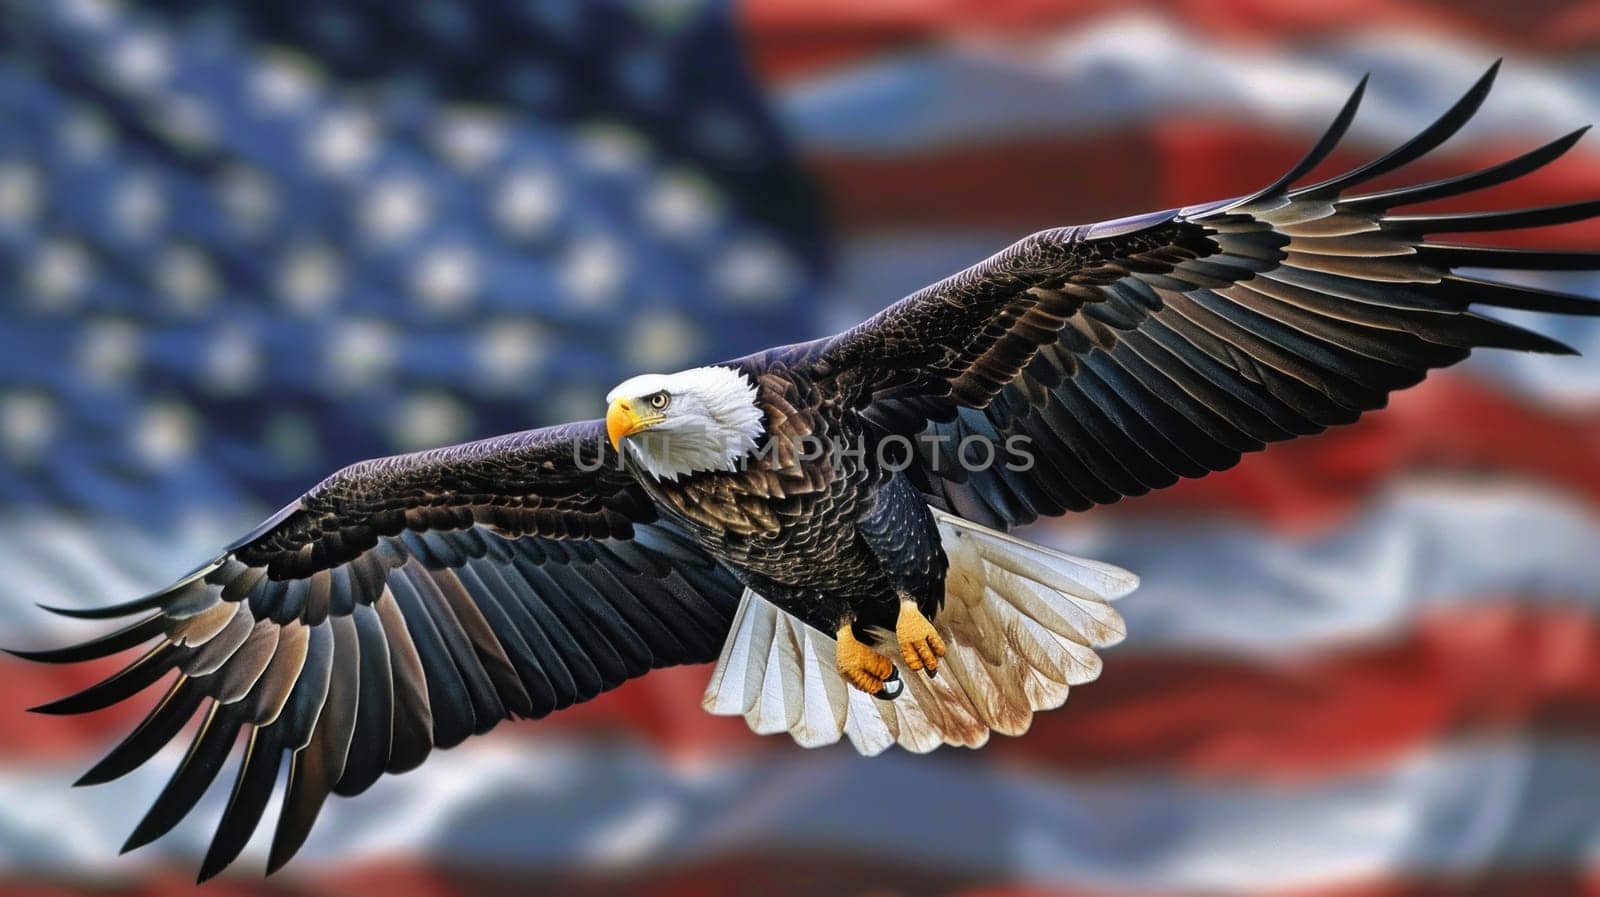 A bald eagle flying over a red, white, and blue American flag by golfmerrymaker